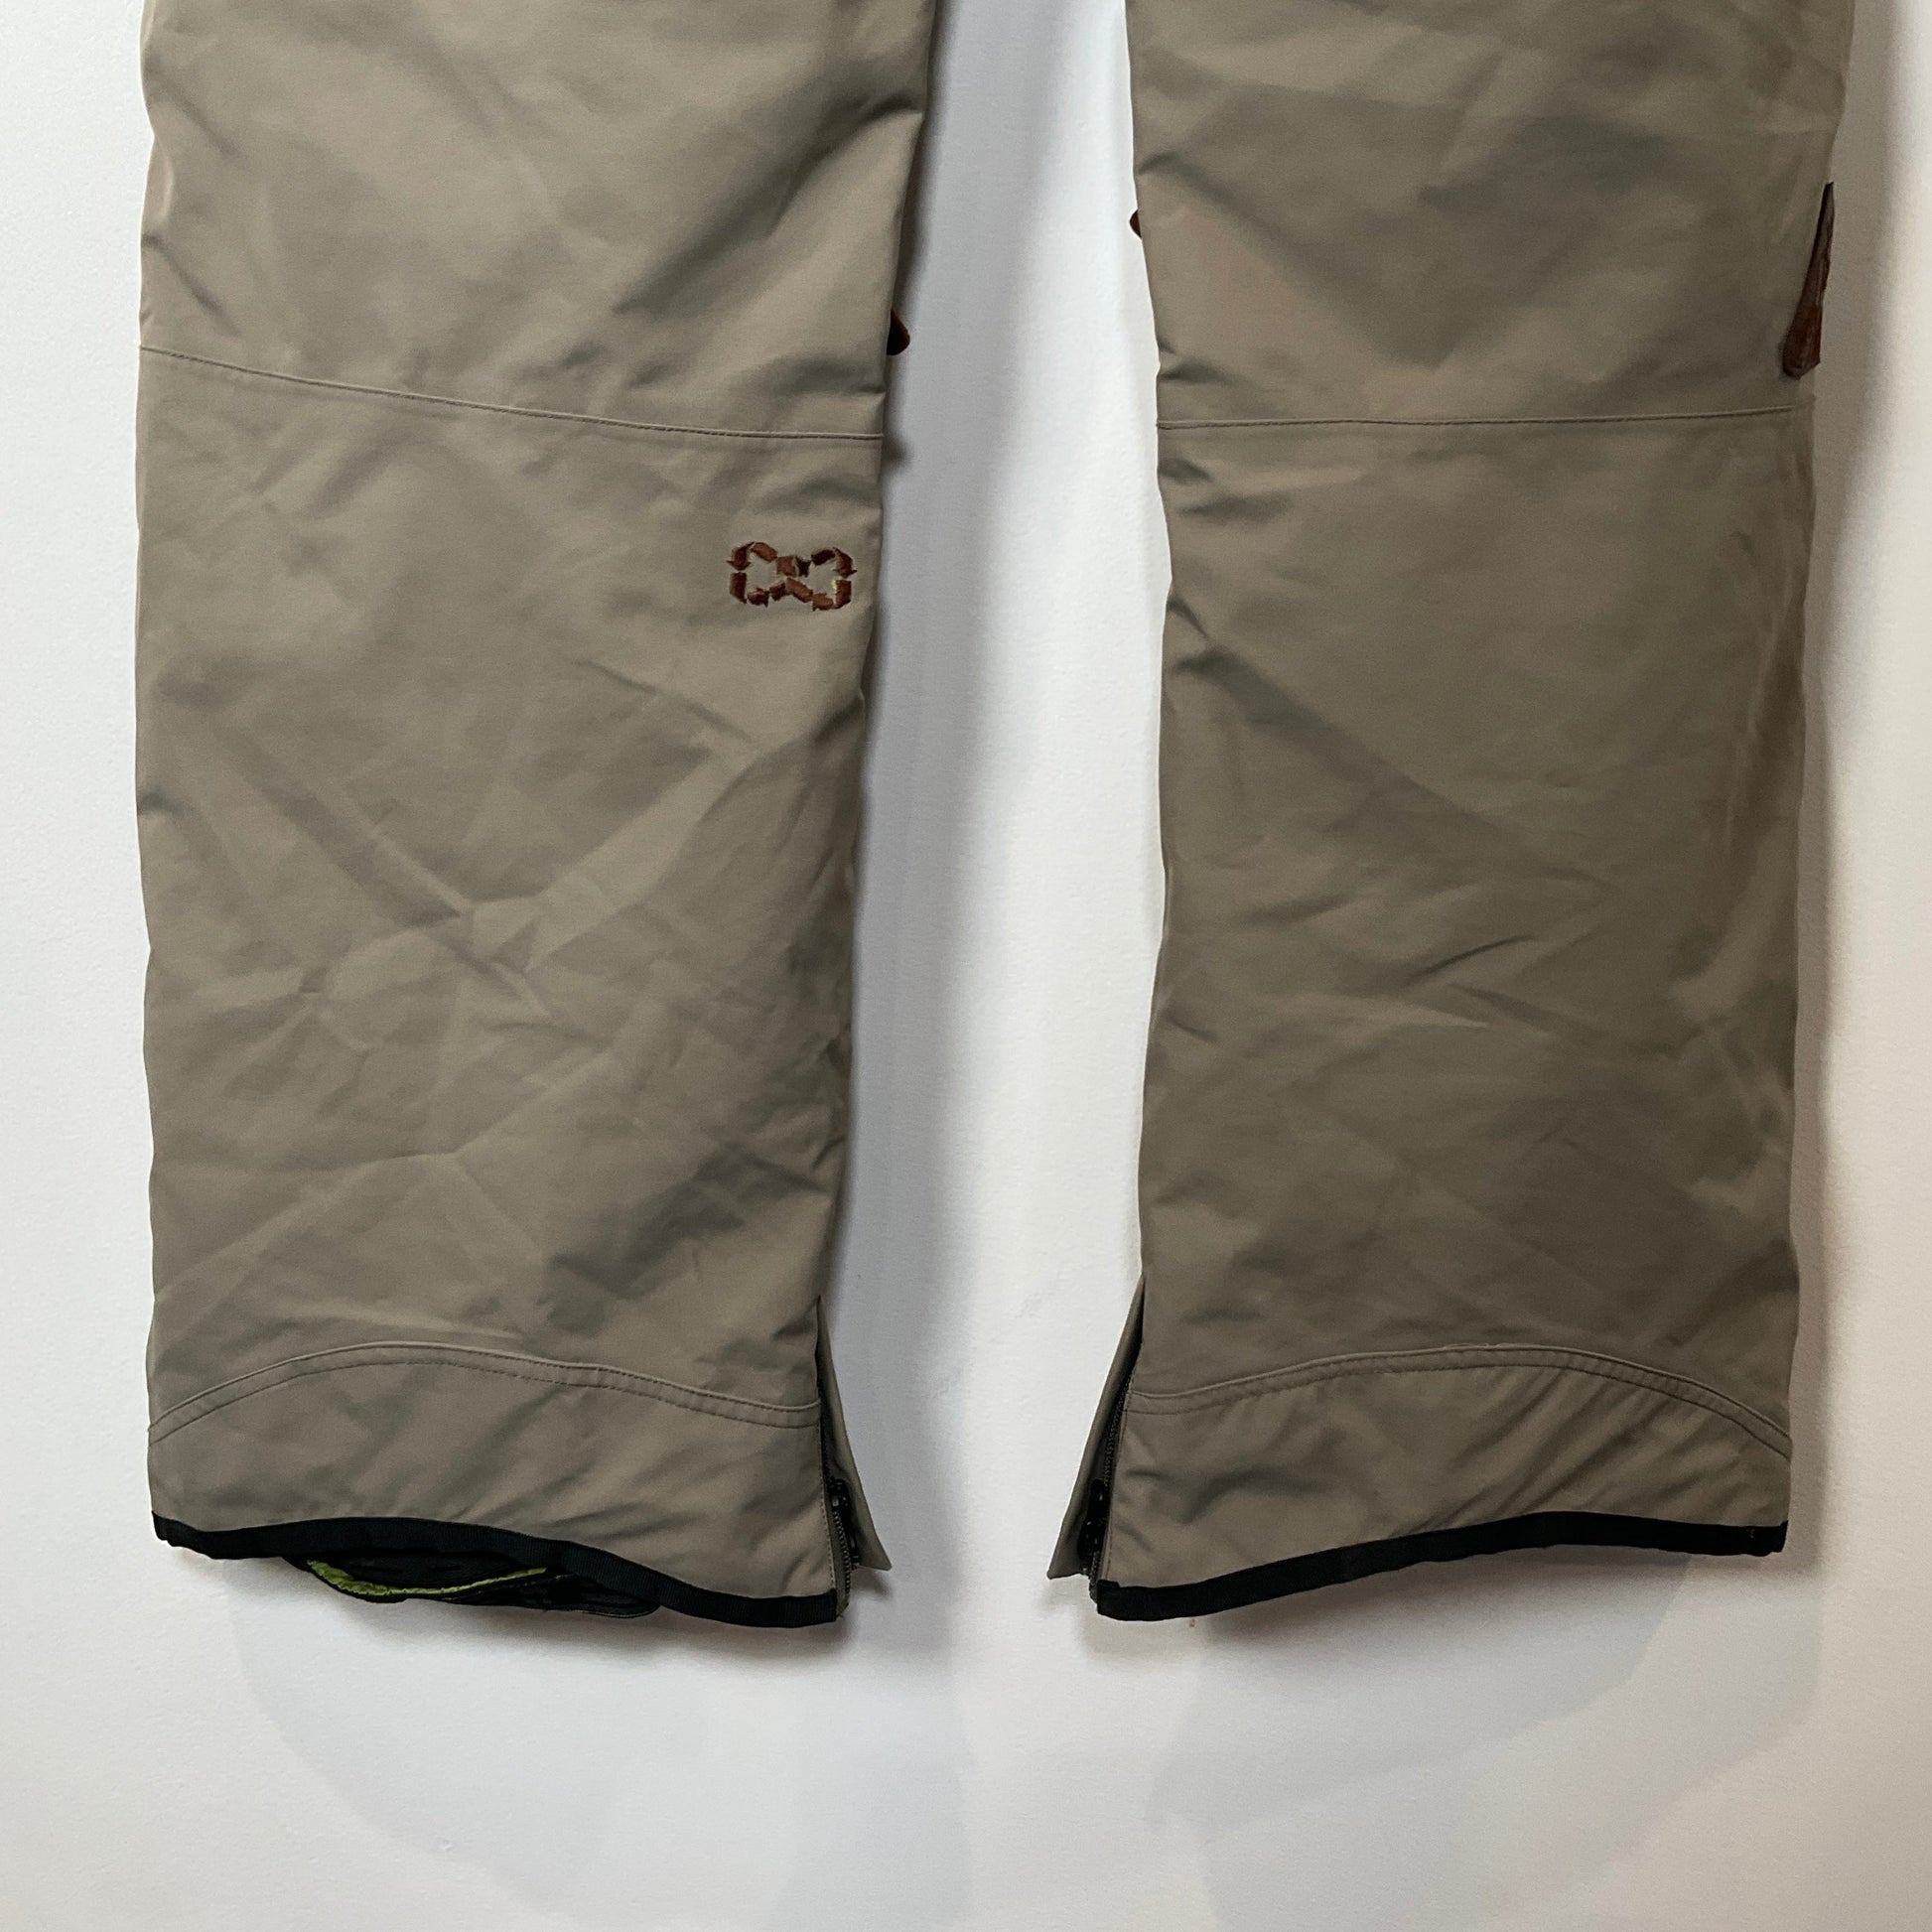 Ini Co-Op - Outdoor Trousers Pants